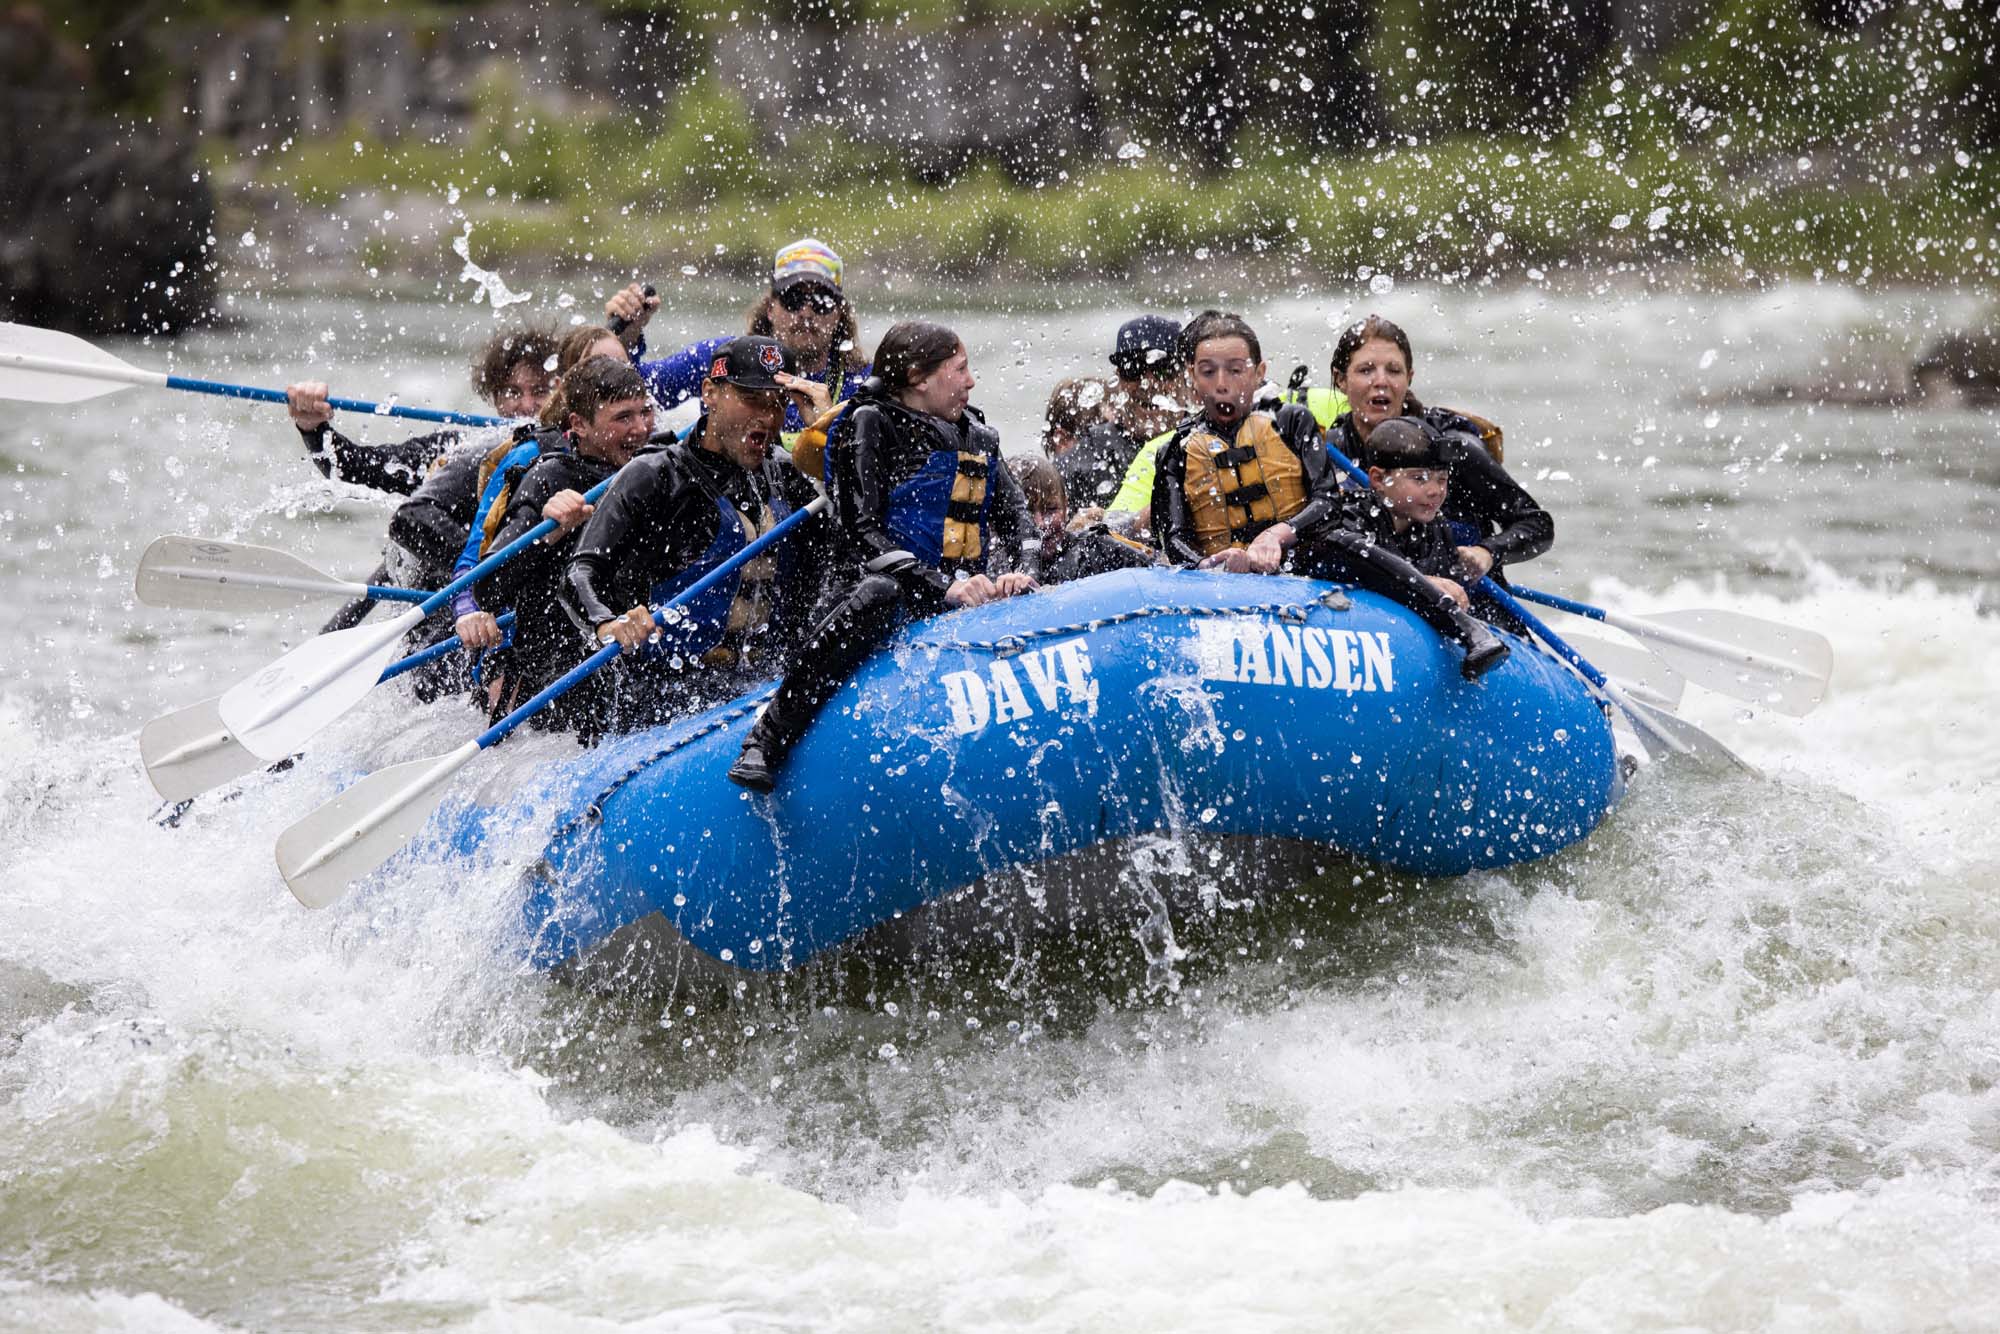 Whitewater rafting group gets splashed on a rainy day adventure in Jackson Hole